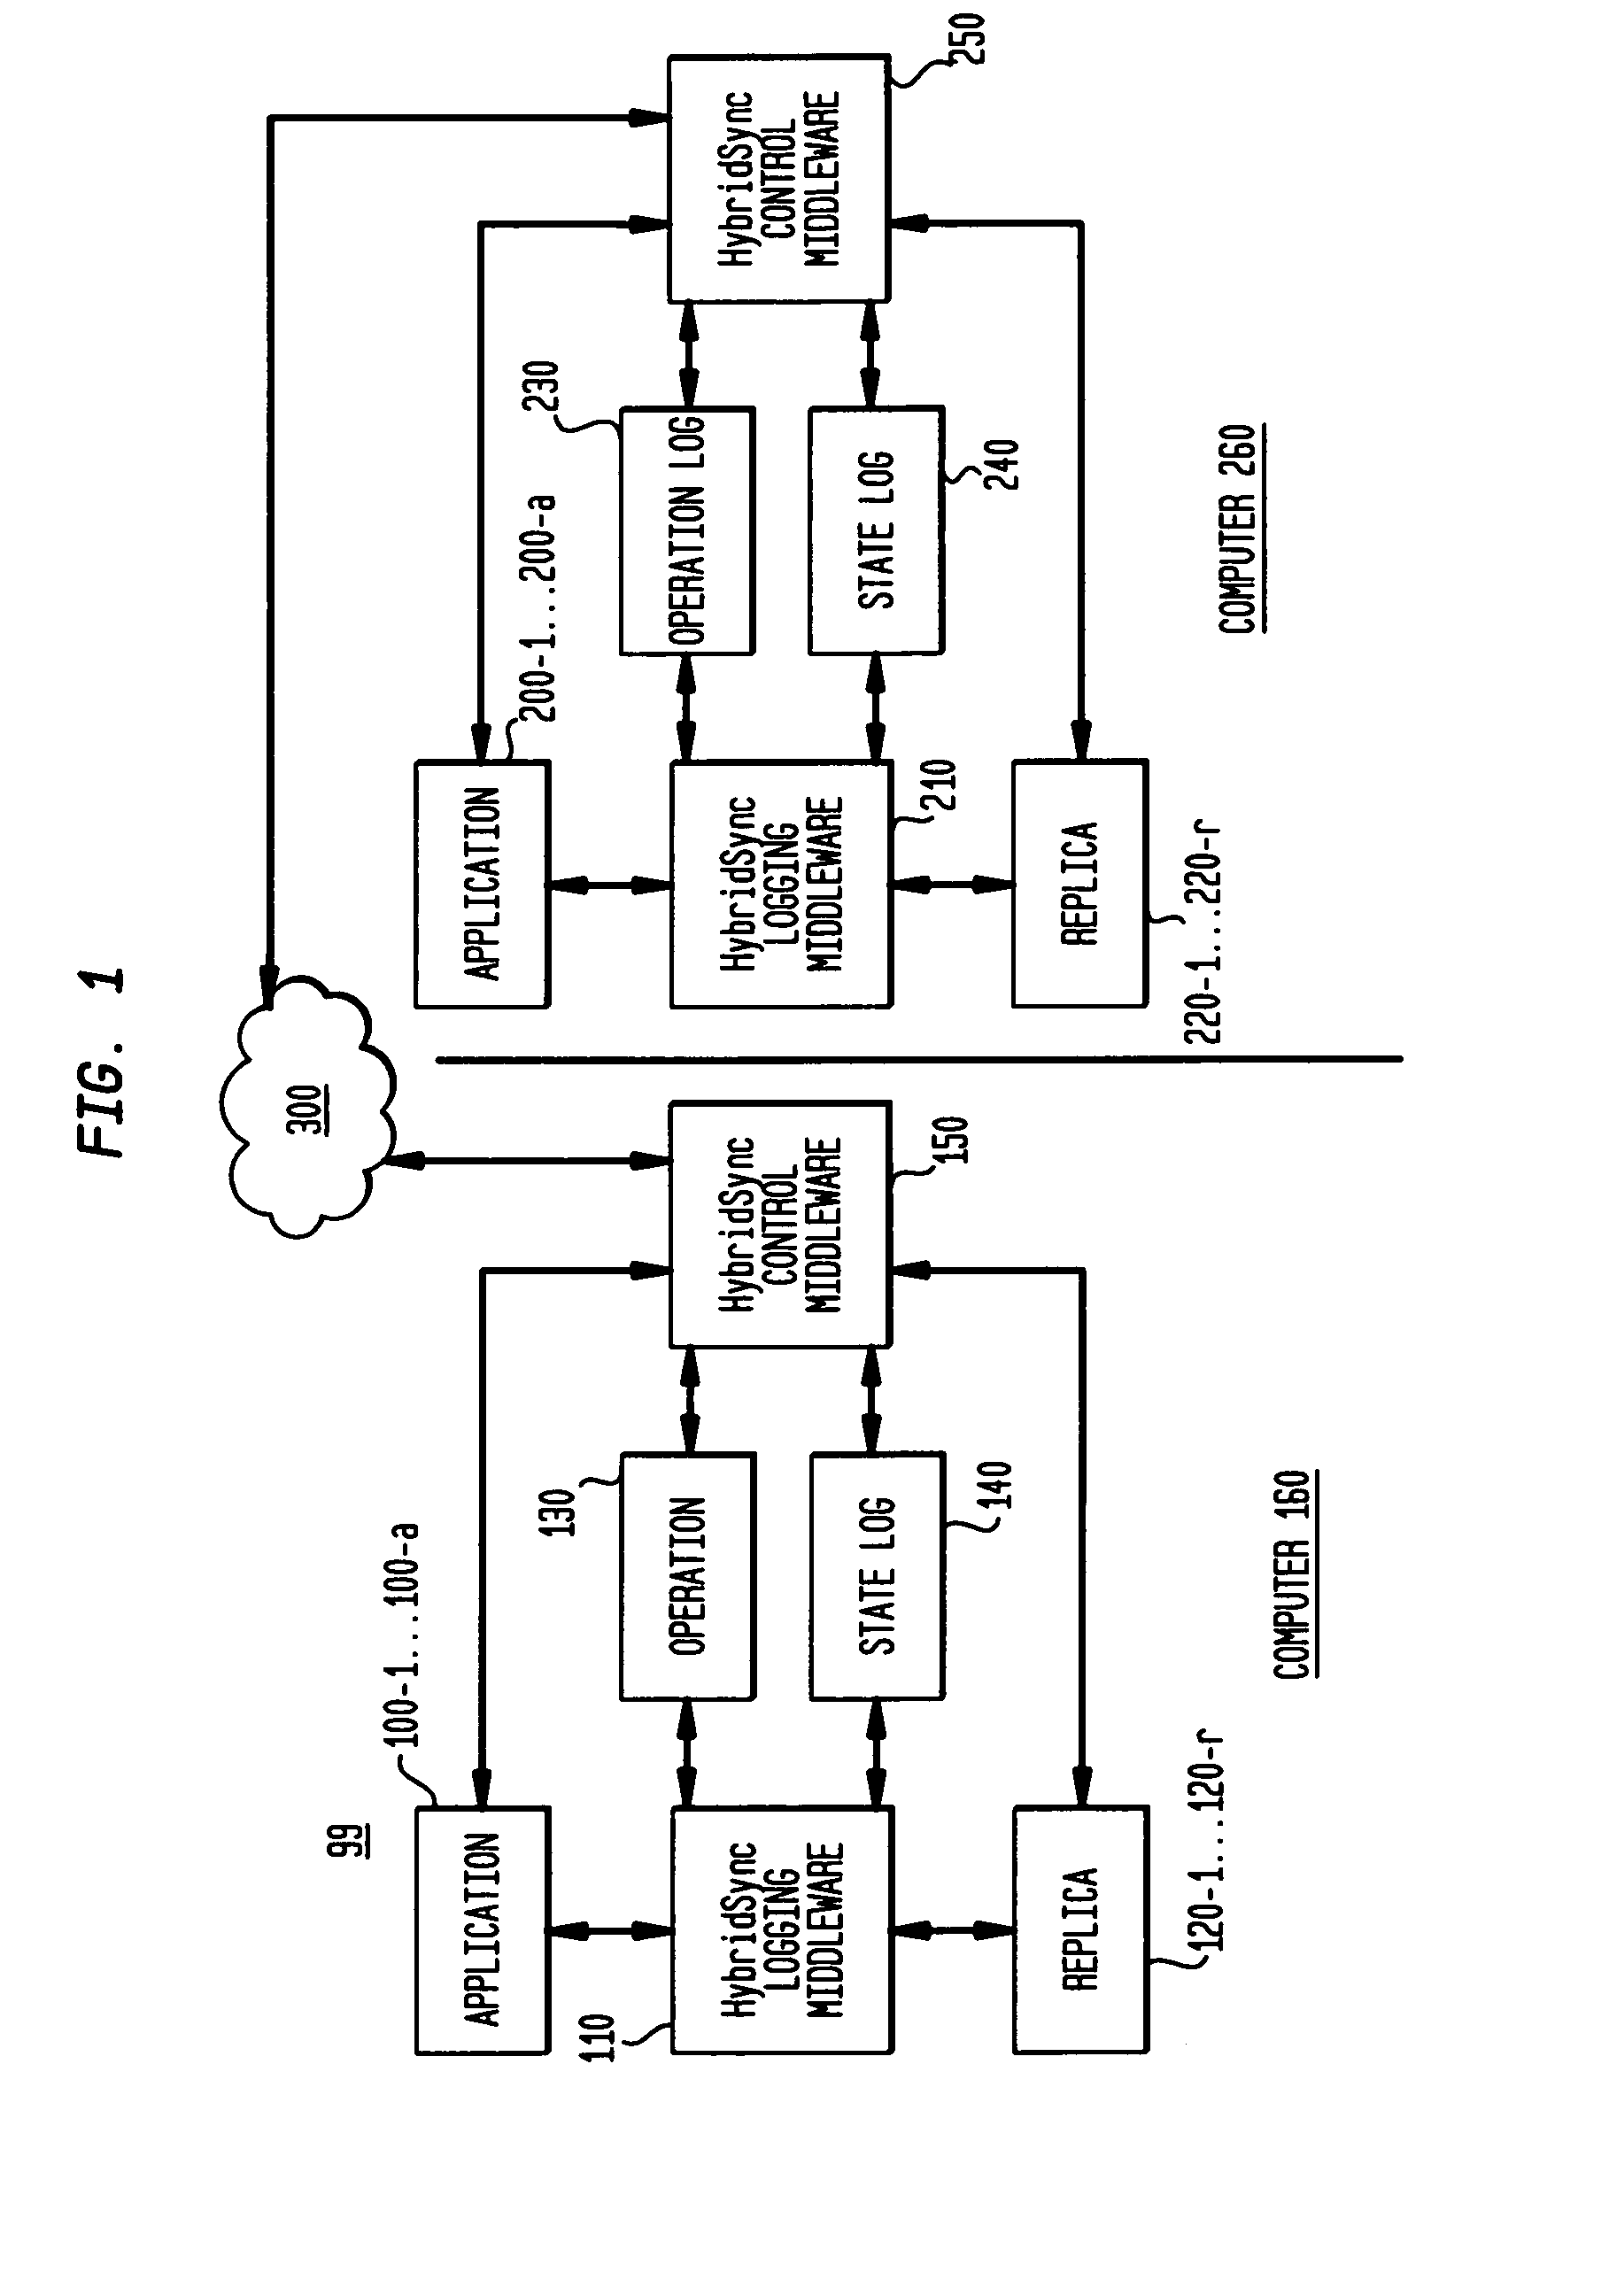 Method and system combining state replication and operational-replay synchronization